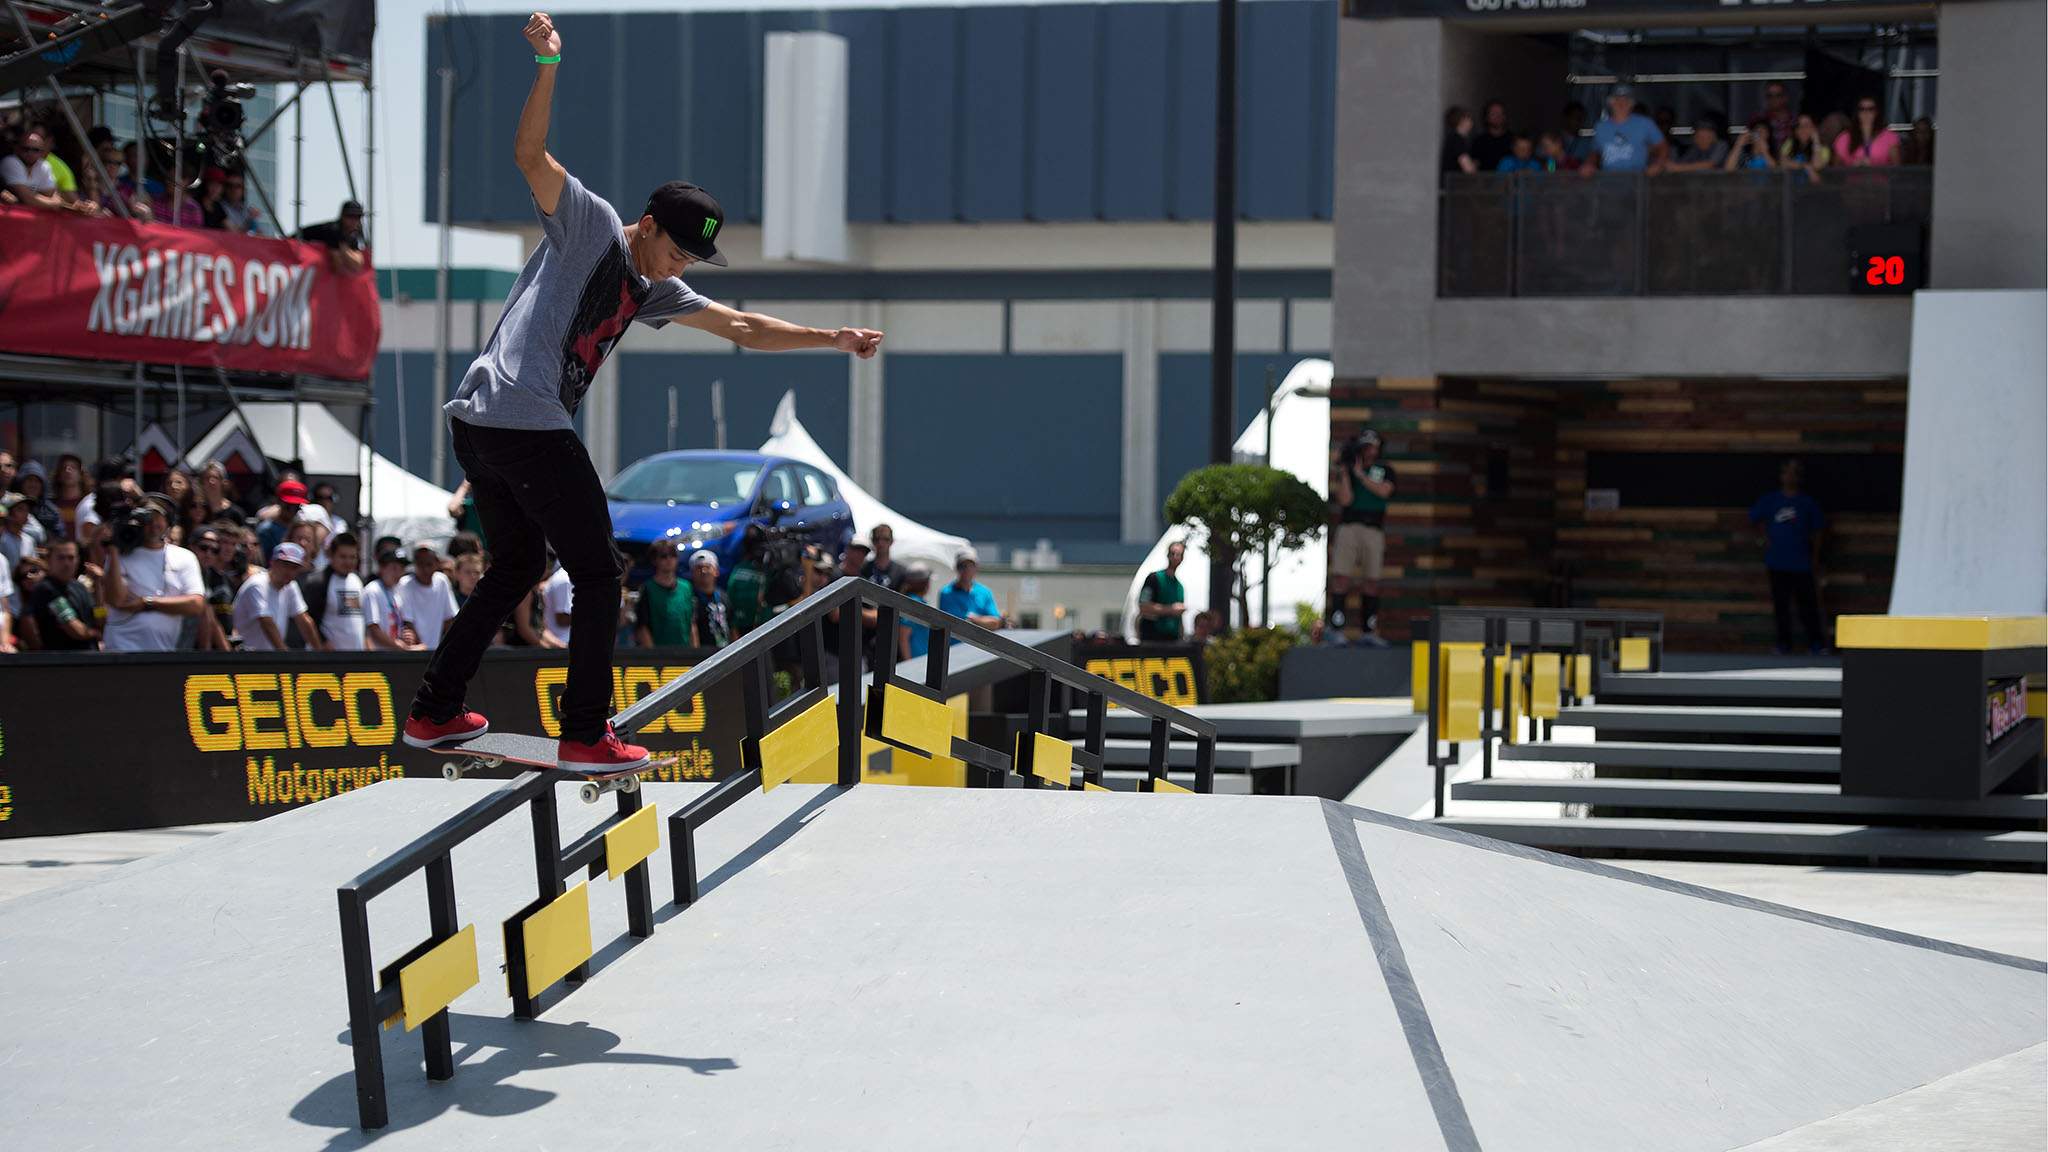 Did anybody doubt that when Nyjah Huston stepped back into Street League at X Games competition, he would be back with a vengeance? Here he is, qualifying first in prelims Friday morning.